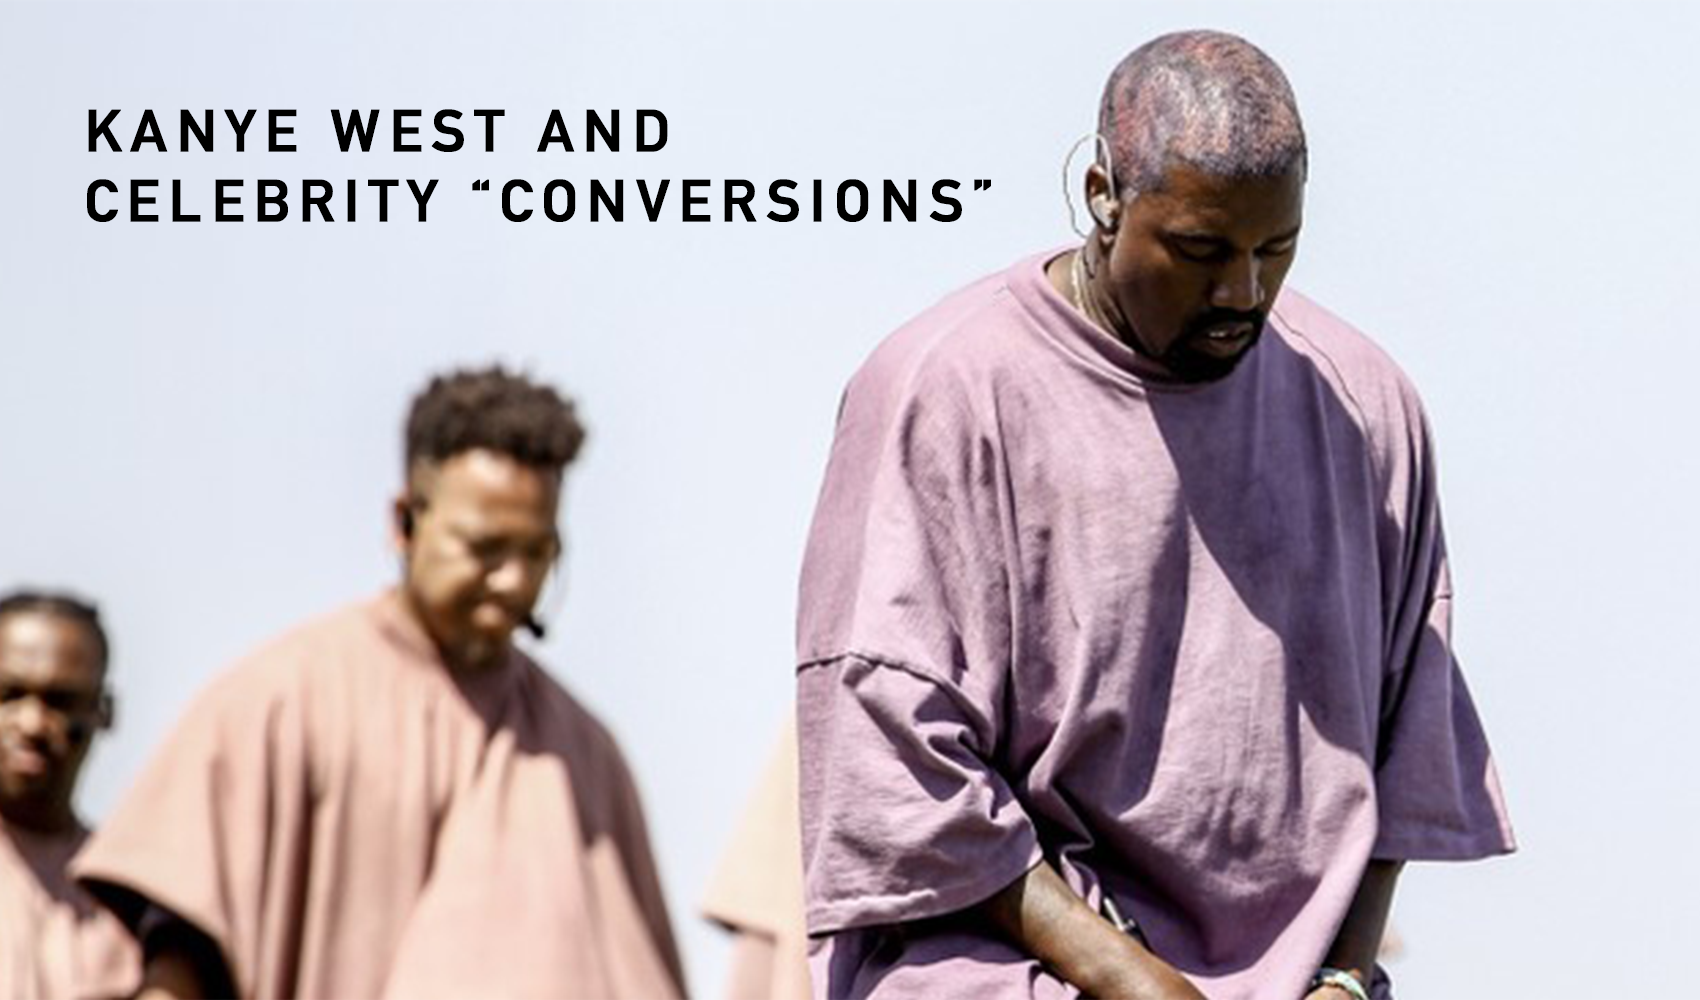 Kanye West and celebrity “conversions”